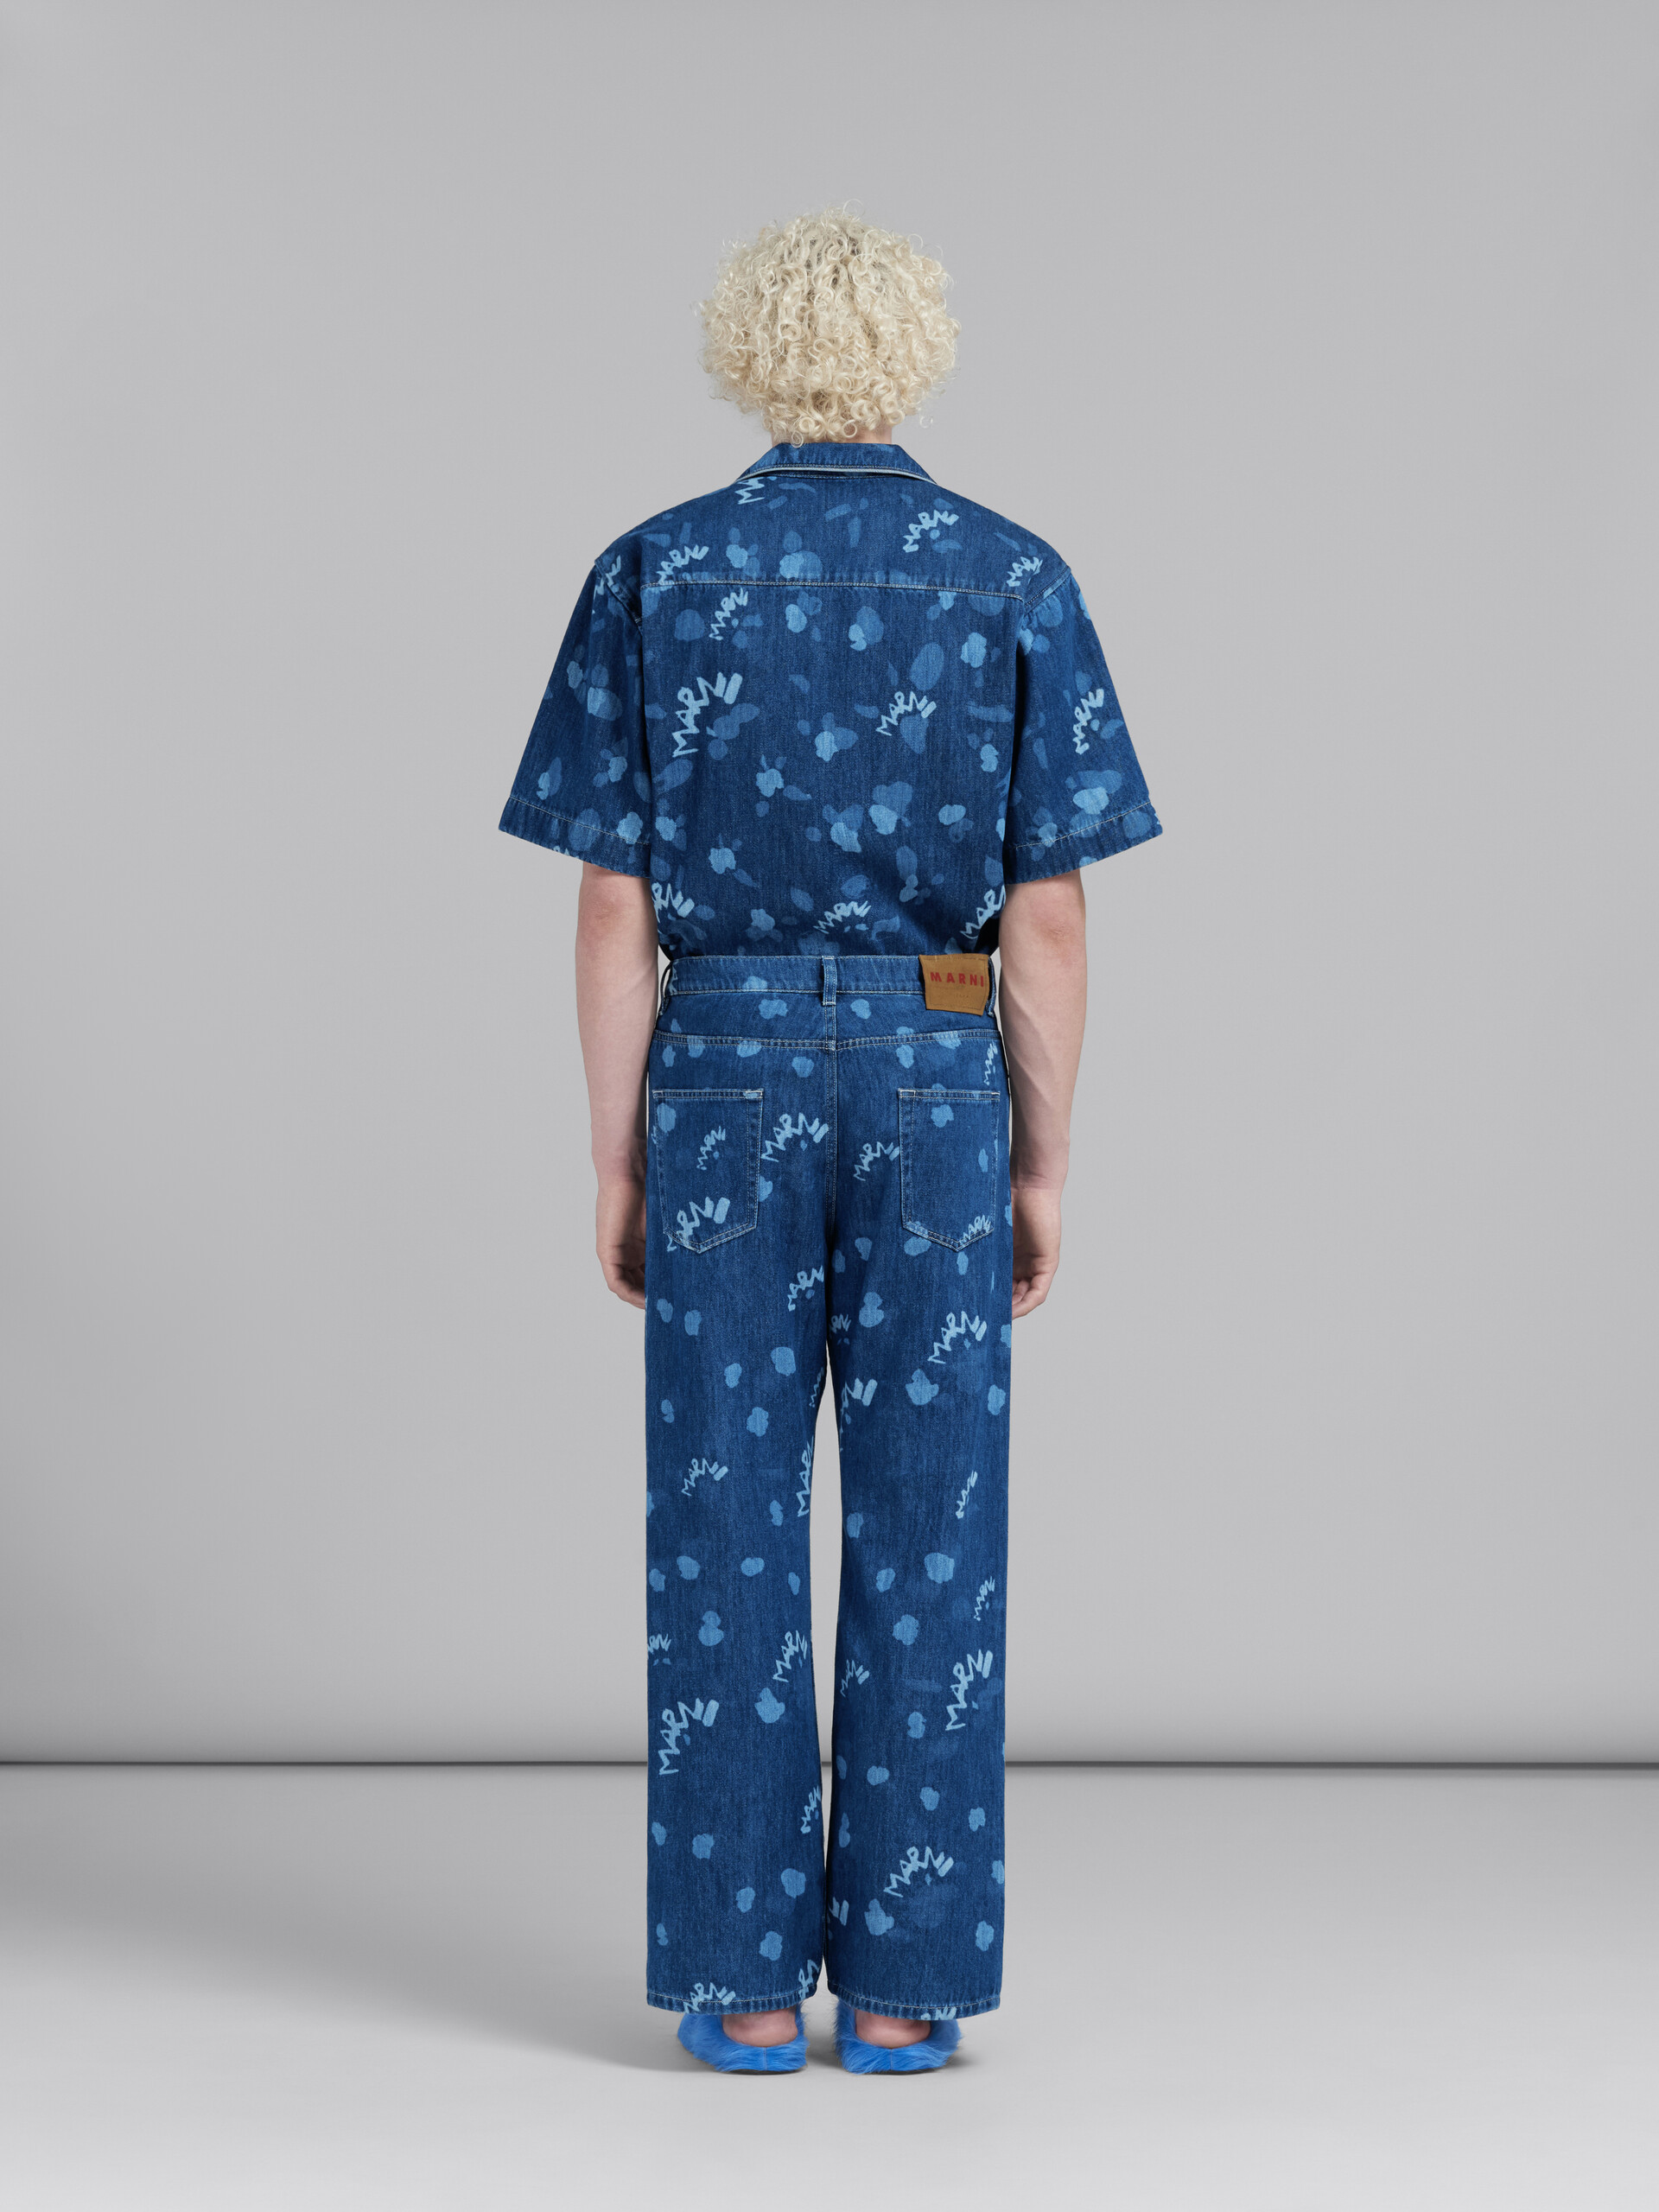 Blue denim jeans with Marni Dripping print - Pants - Image 3